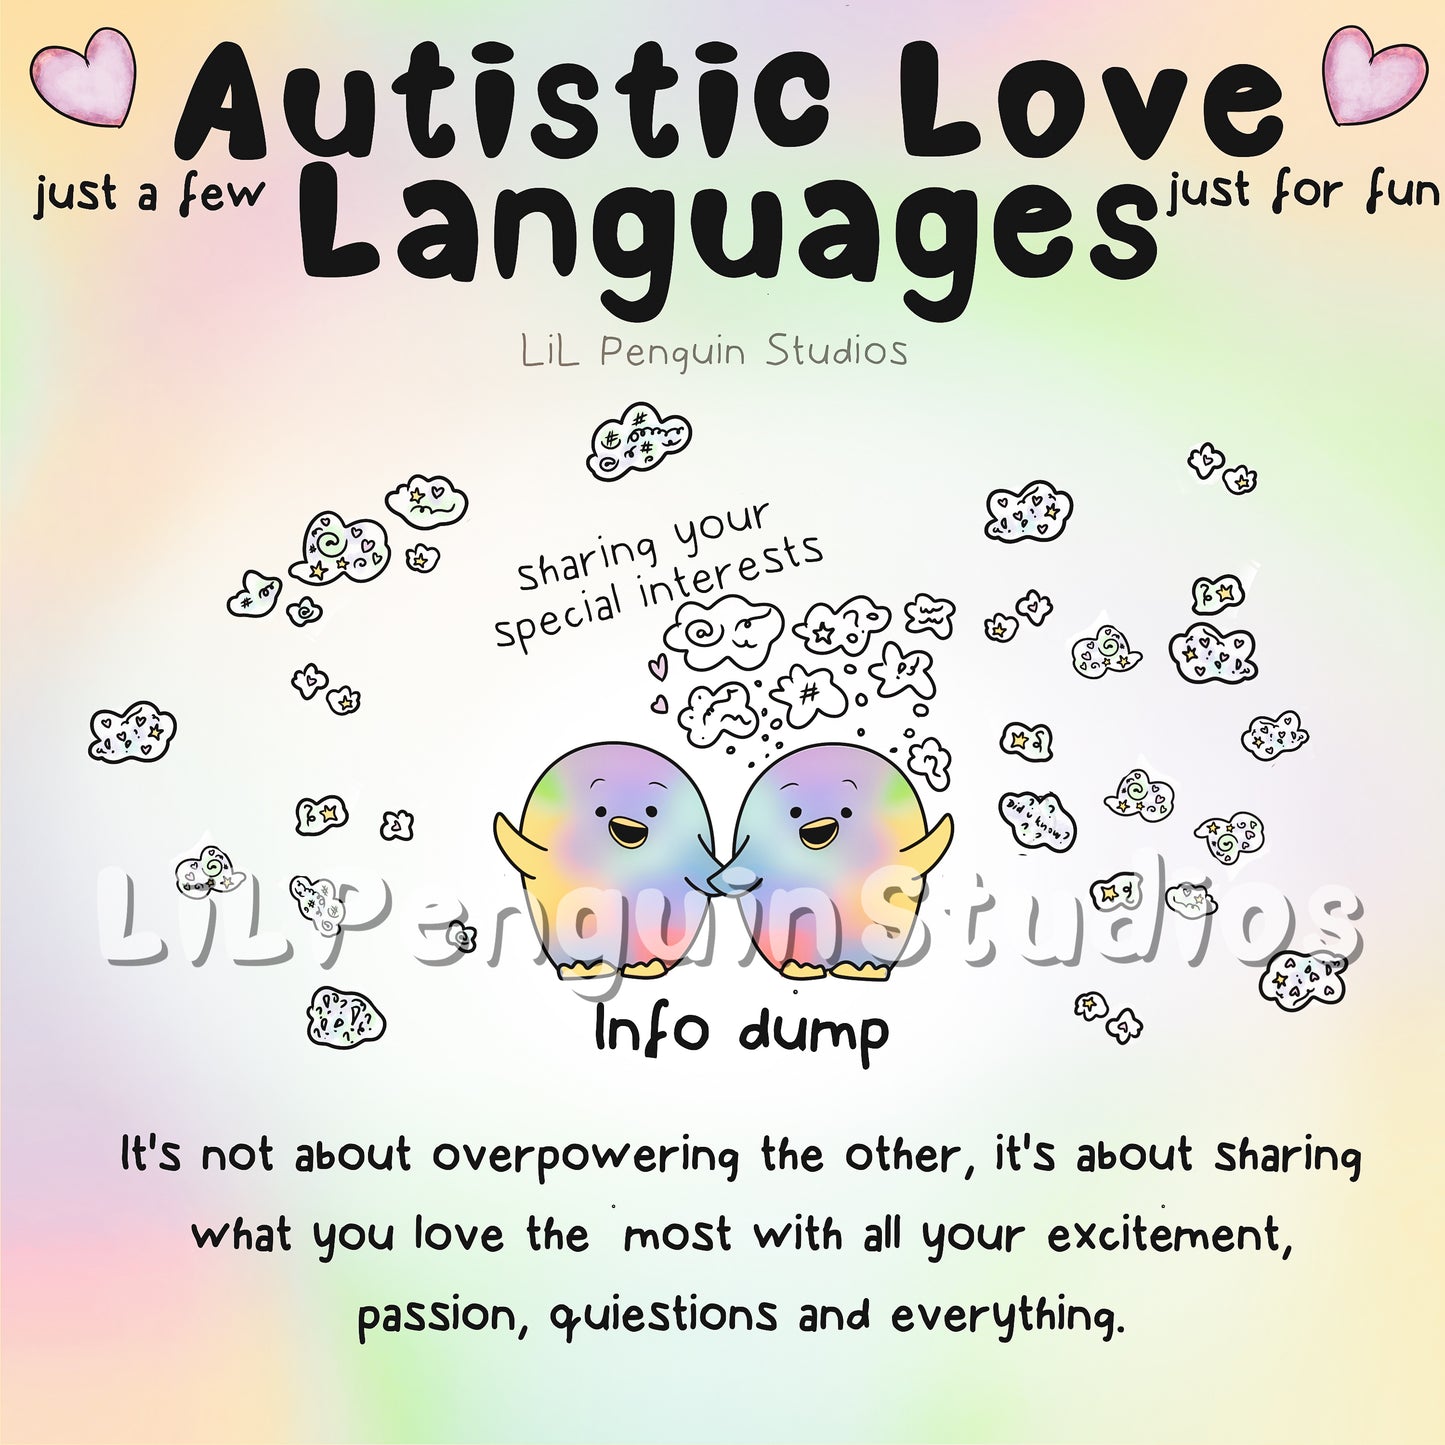 'Autistic Love Languages' Printable Bundle with Worksheets - For Institutions, Journals, etc.